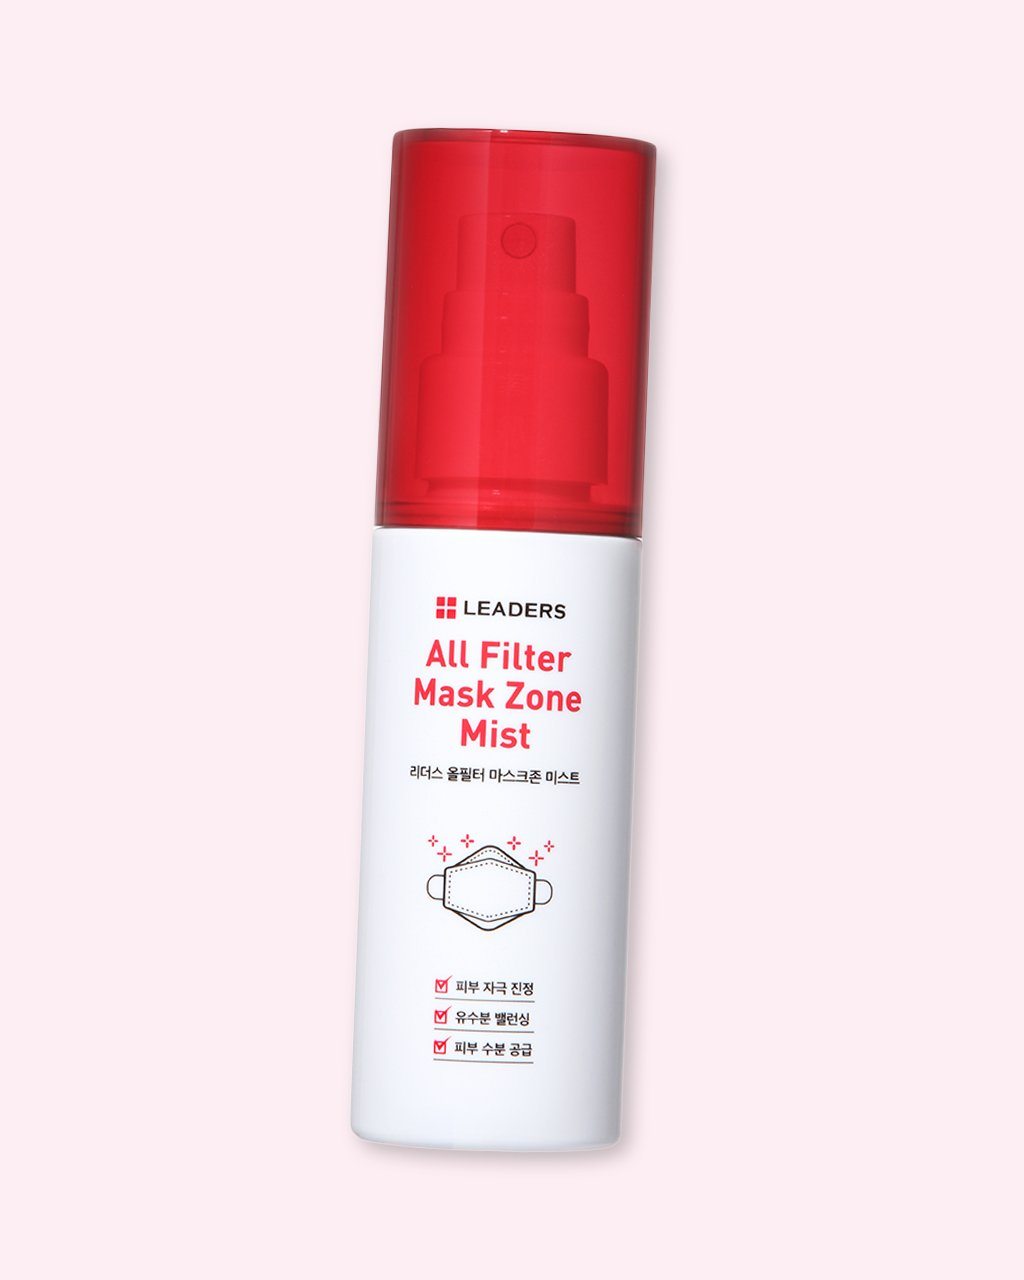 All Filter Mask Zone Mist Facial Mist LEADERS 